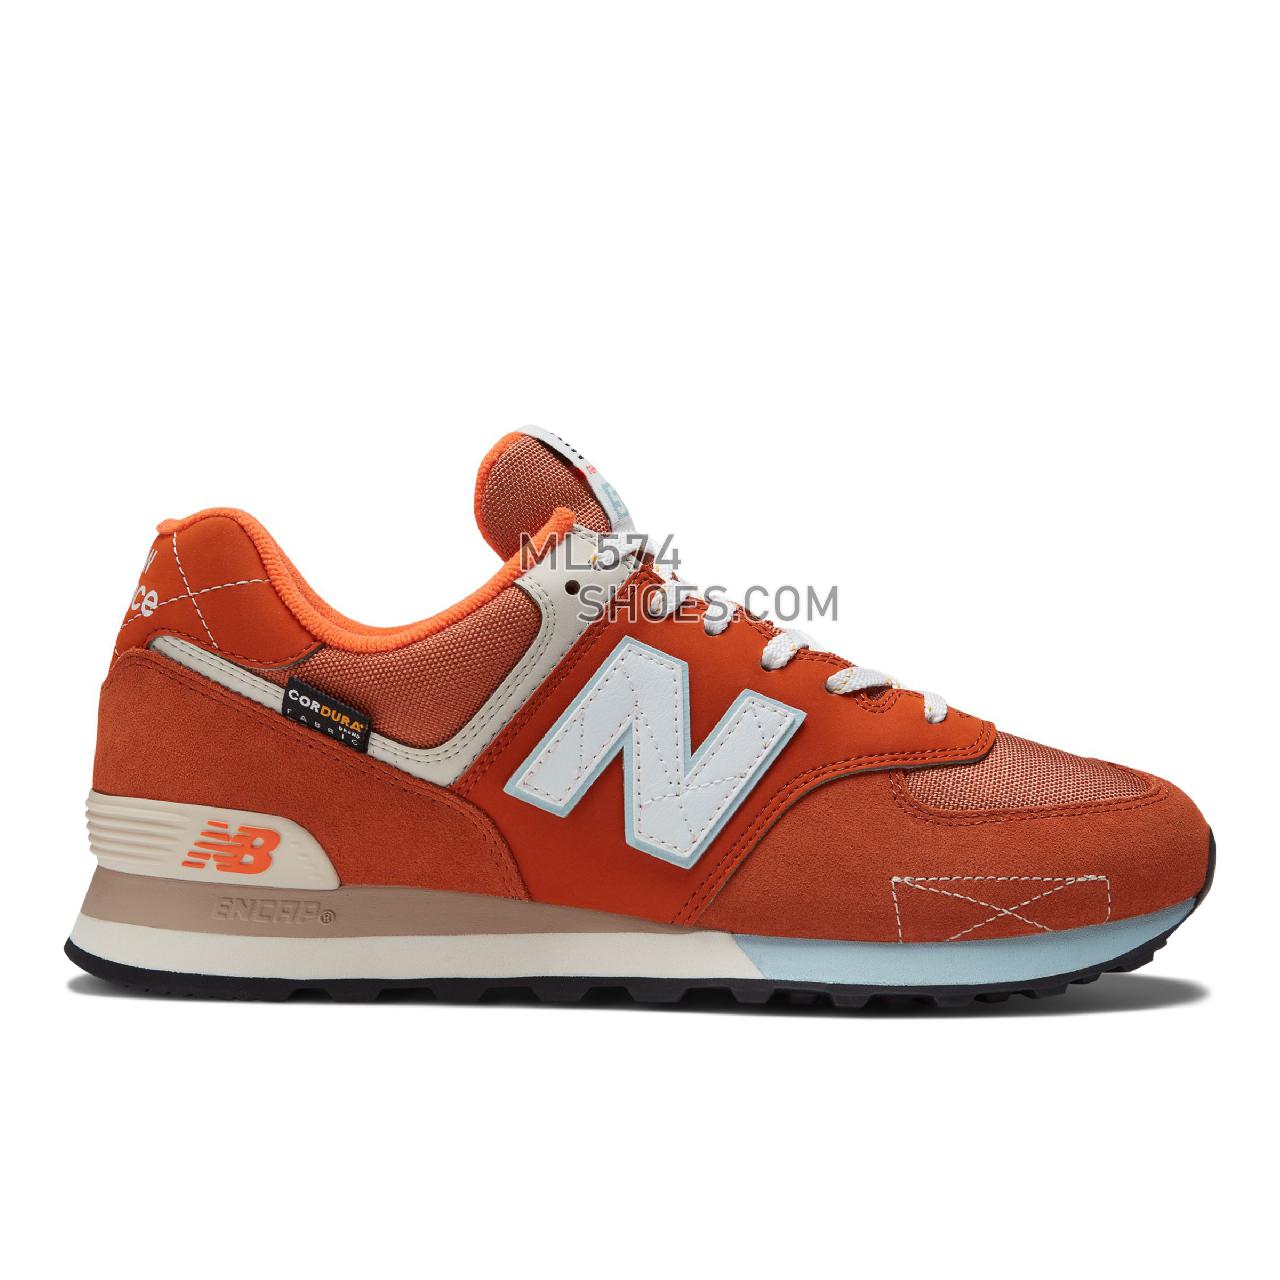 New Balance 574v2 - Men's Classic Sneakers - Rust with Morning Fog - ML574HS2